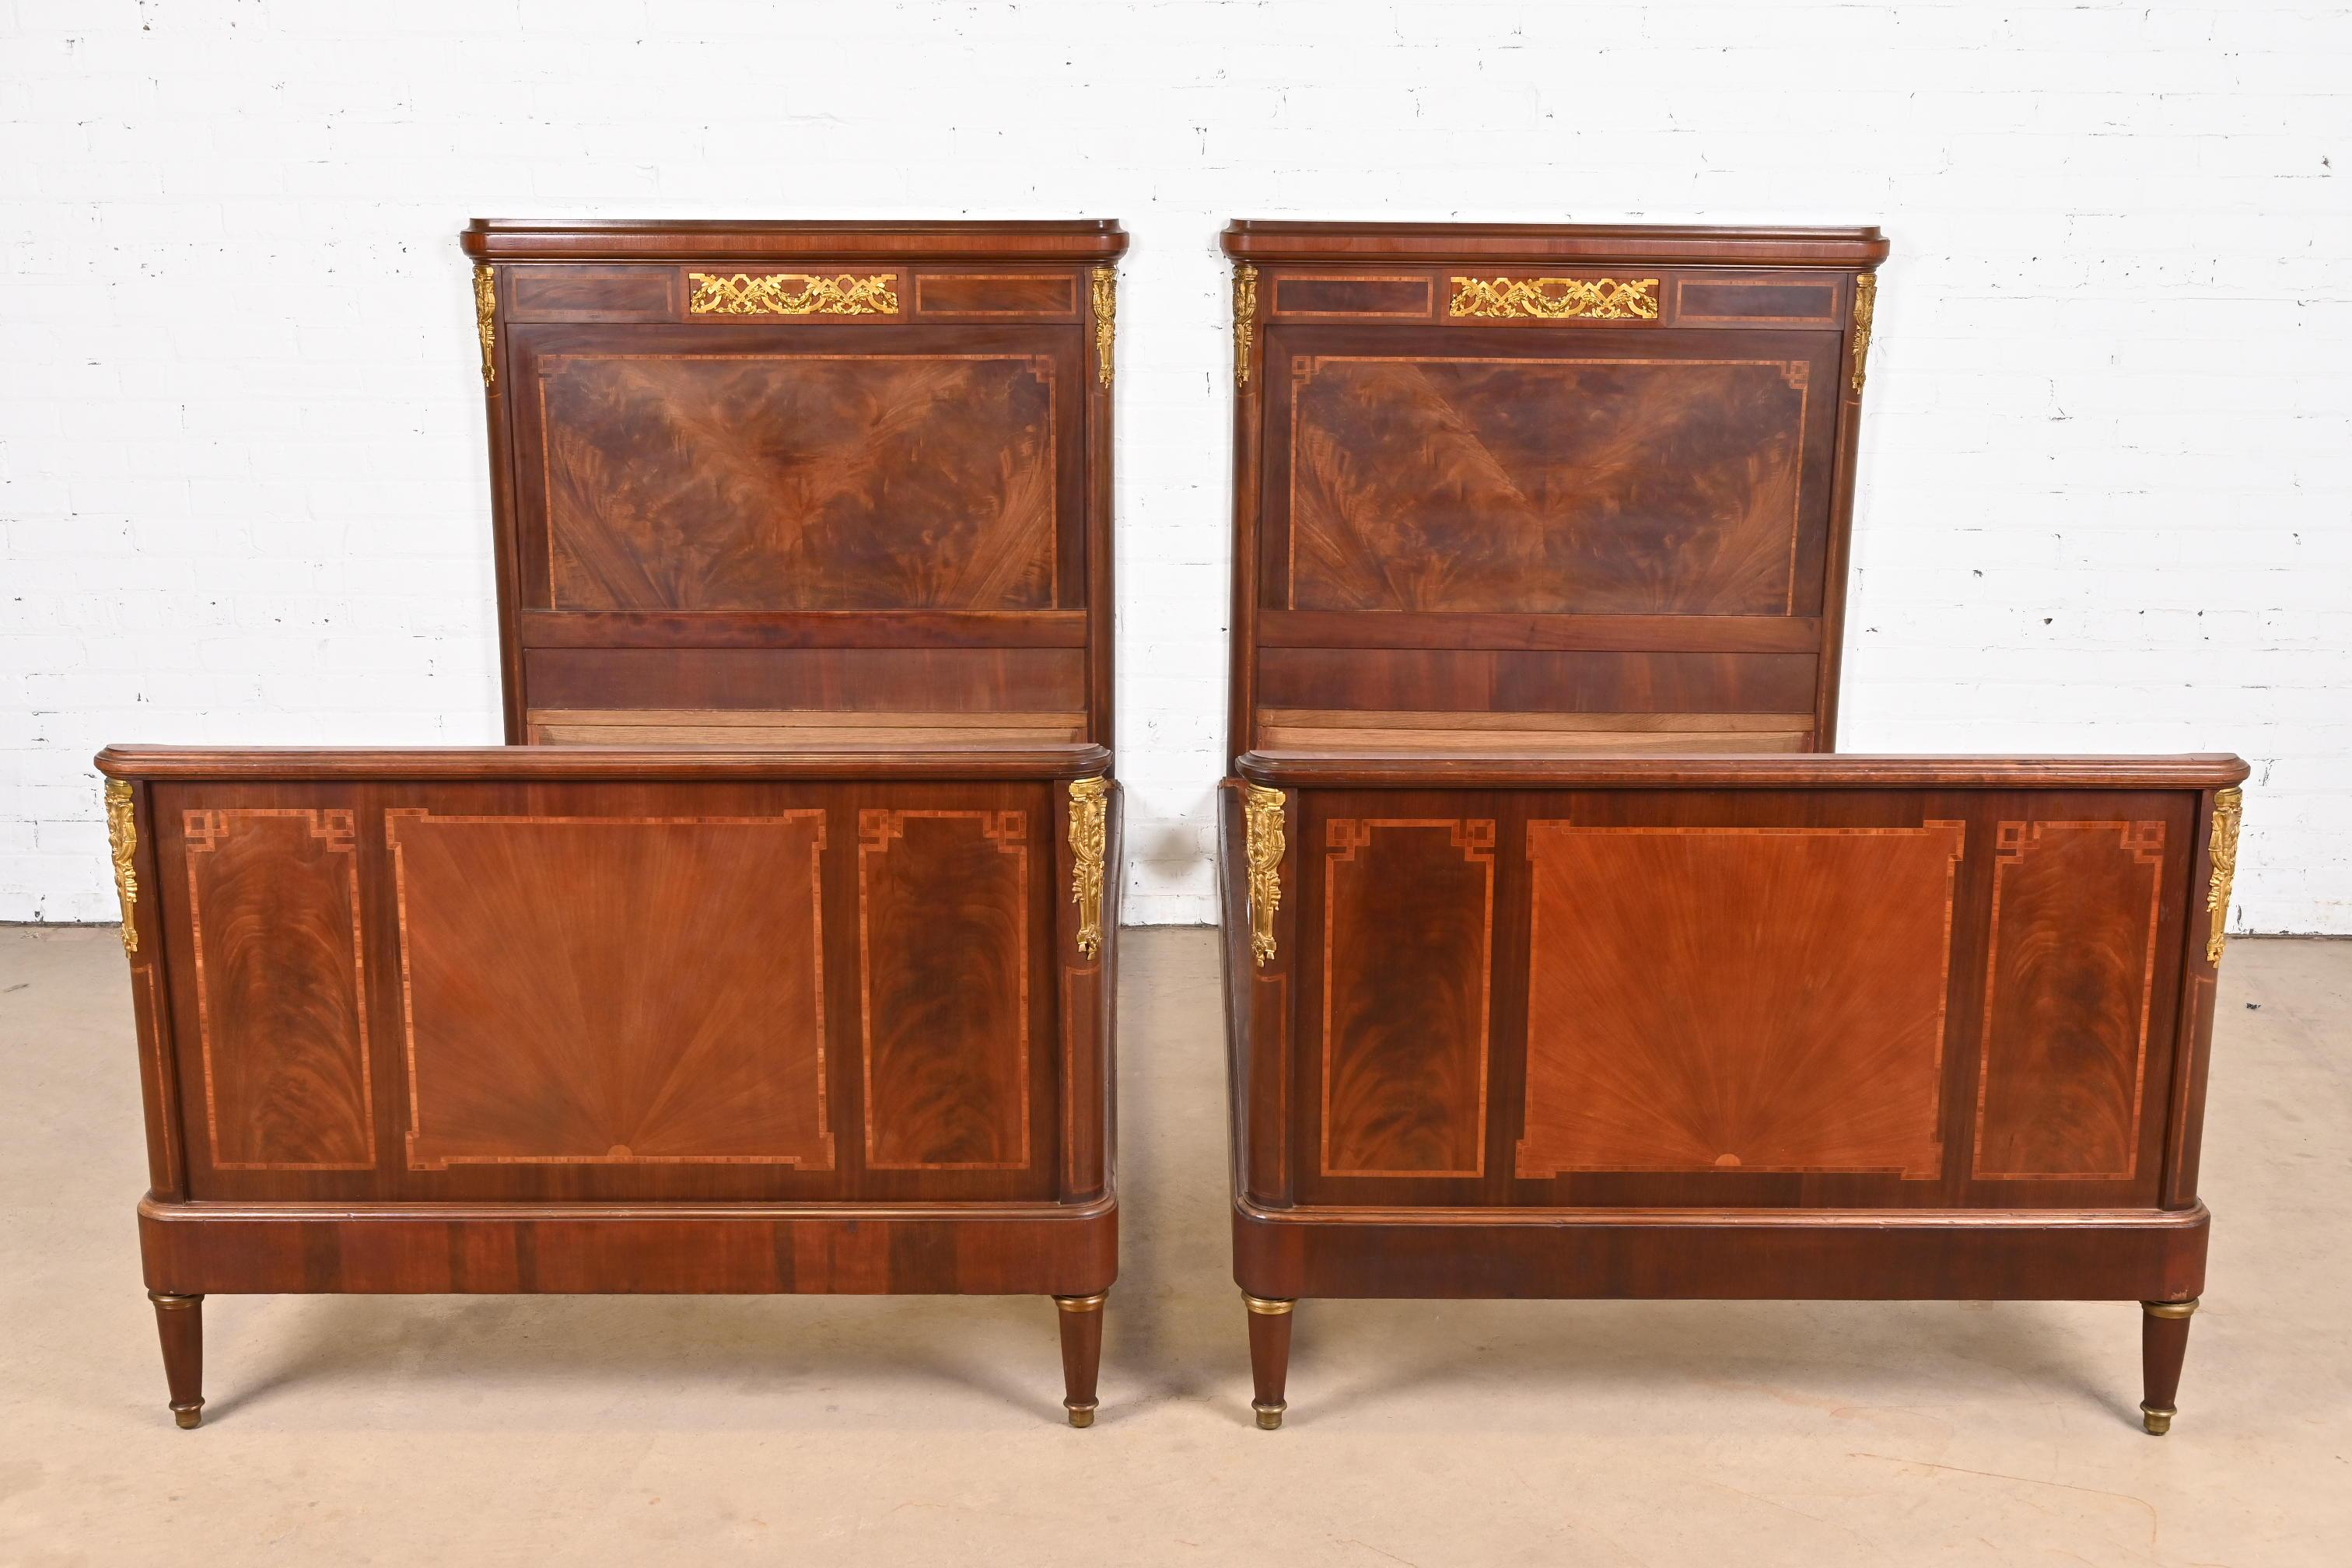 A gorgeous pair of antique French Empire, French Regency, or Louis XVI style twin size beds

France, Early 20th Century

Gorgeous book matched flame mahogany, with inlaid satinwood banding, and mounted gilt bronze ormolu.

Each measures: 44.25